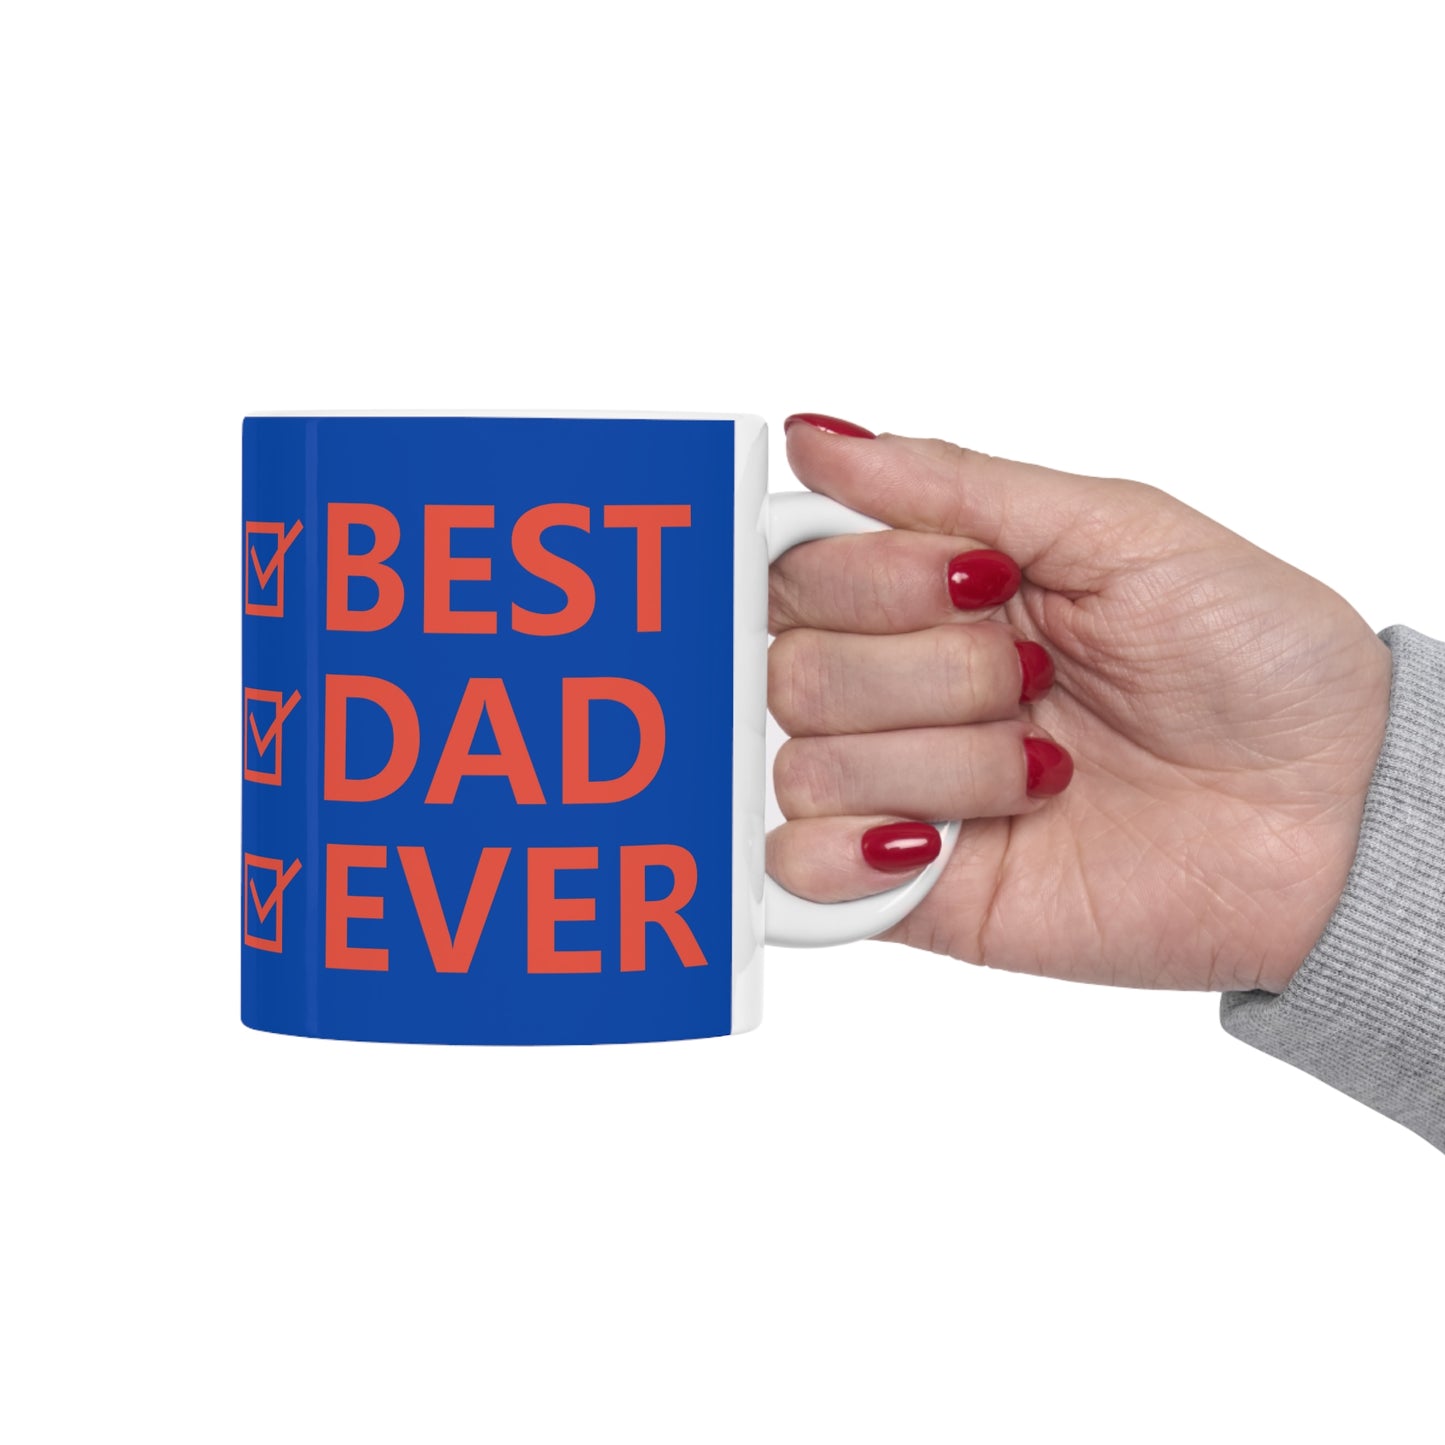 “BEST DAD EVER” on one side and dad happily playing basketball with his son. Part of several mugs to choose from depending on what resonates with you.